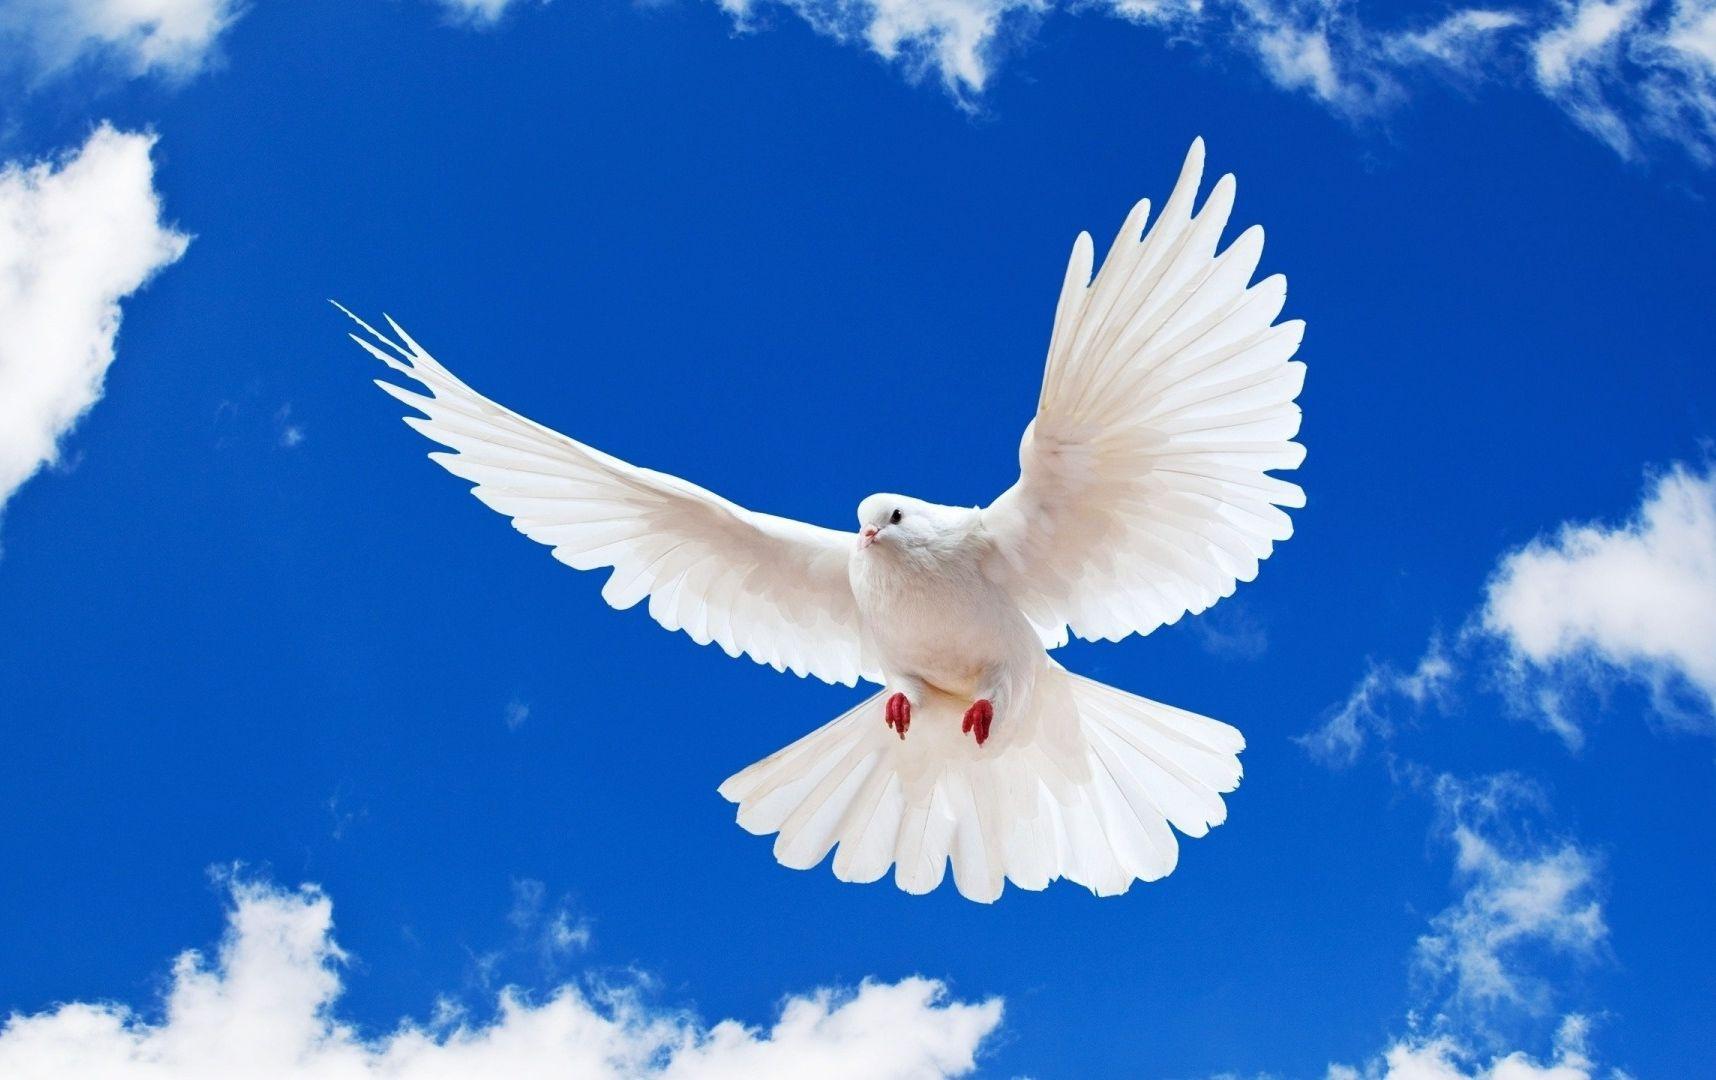 Peace White Dove Flying in Blue Sky Wallpaper and